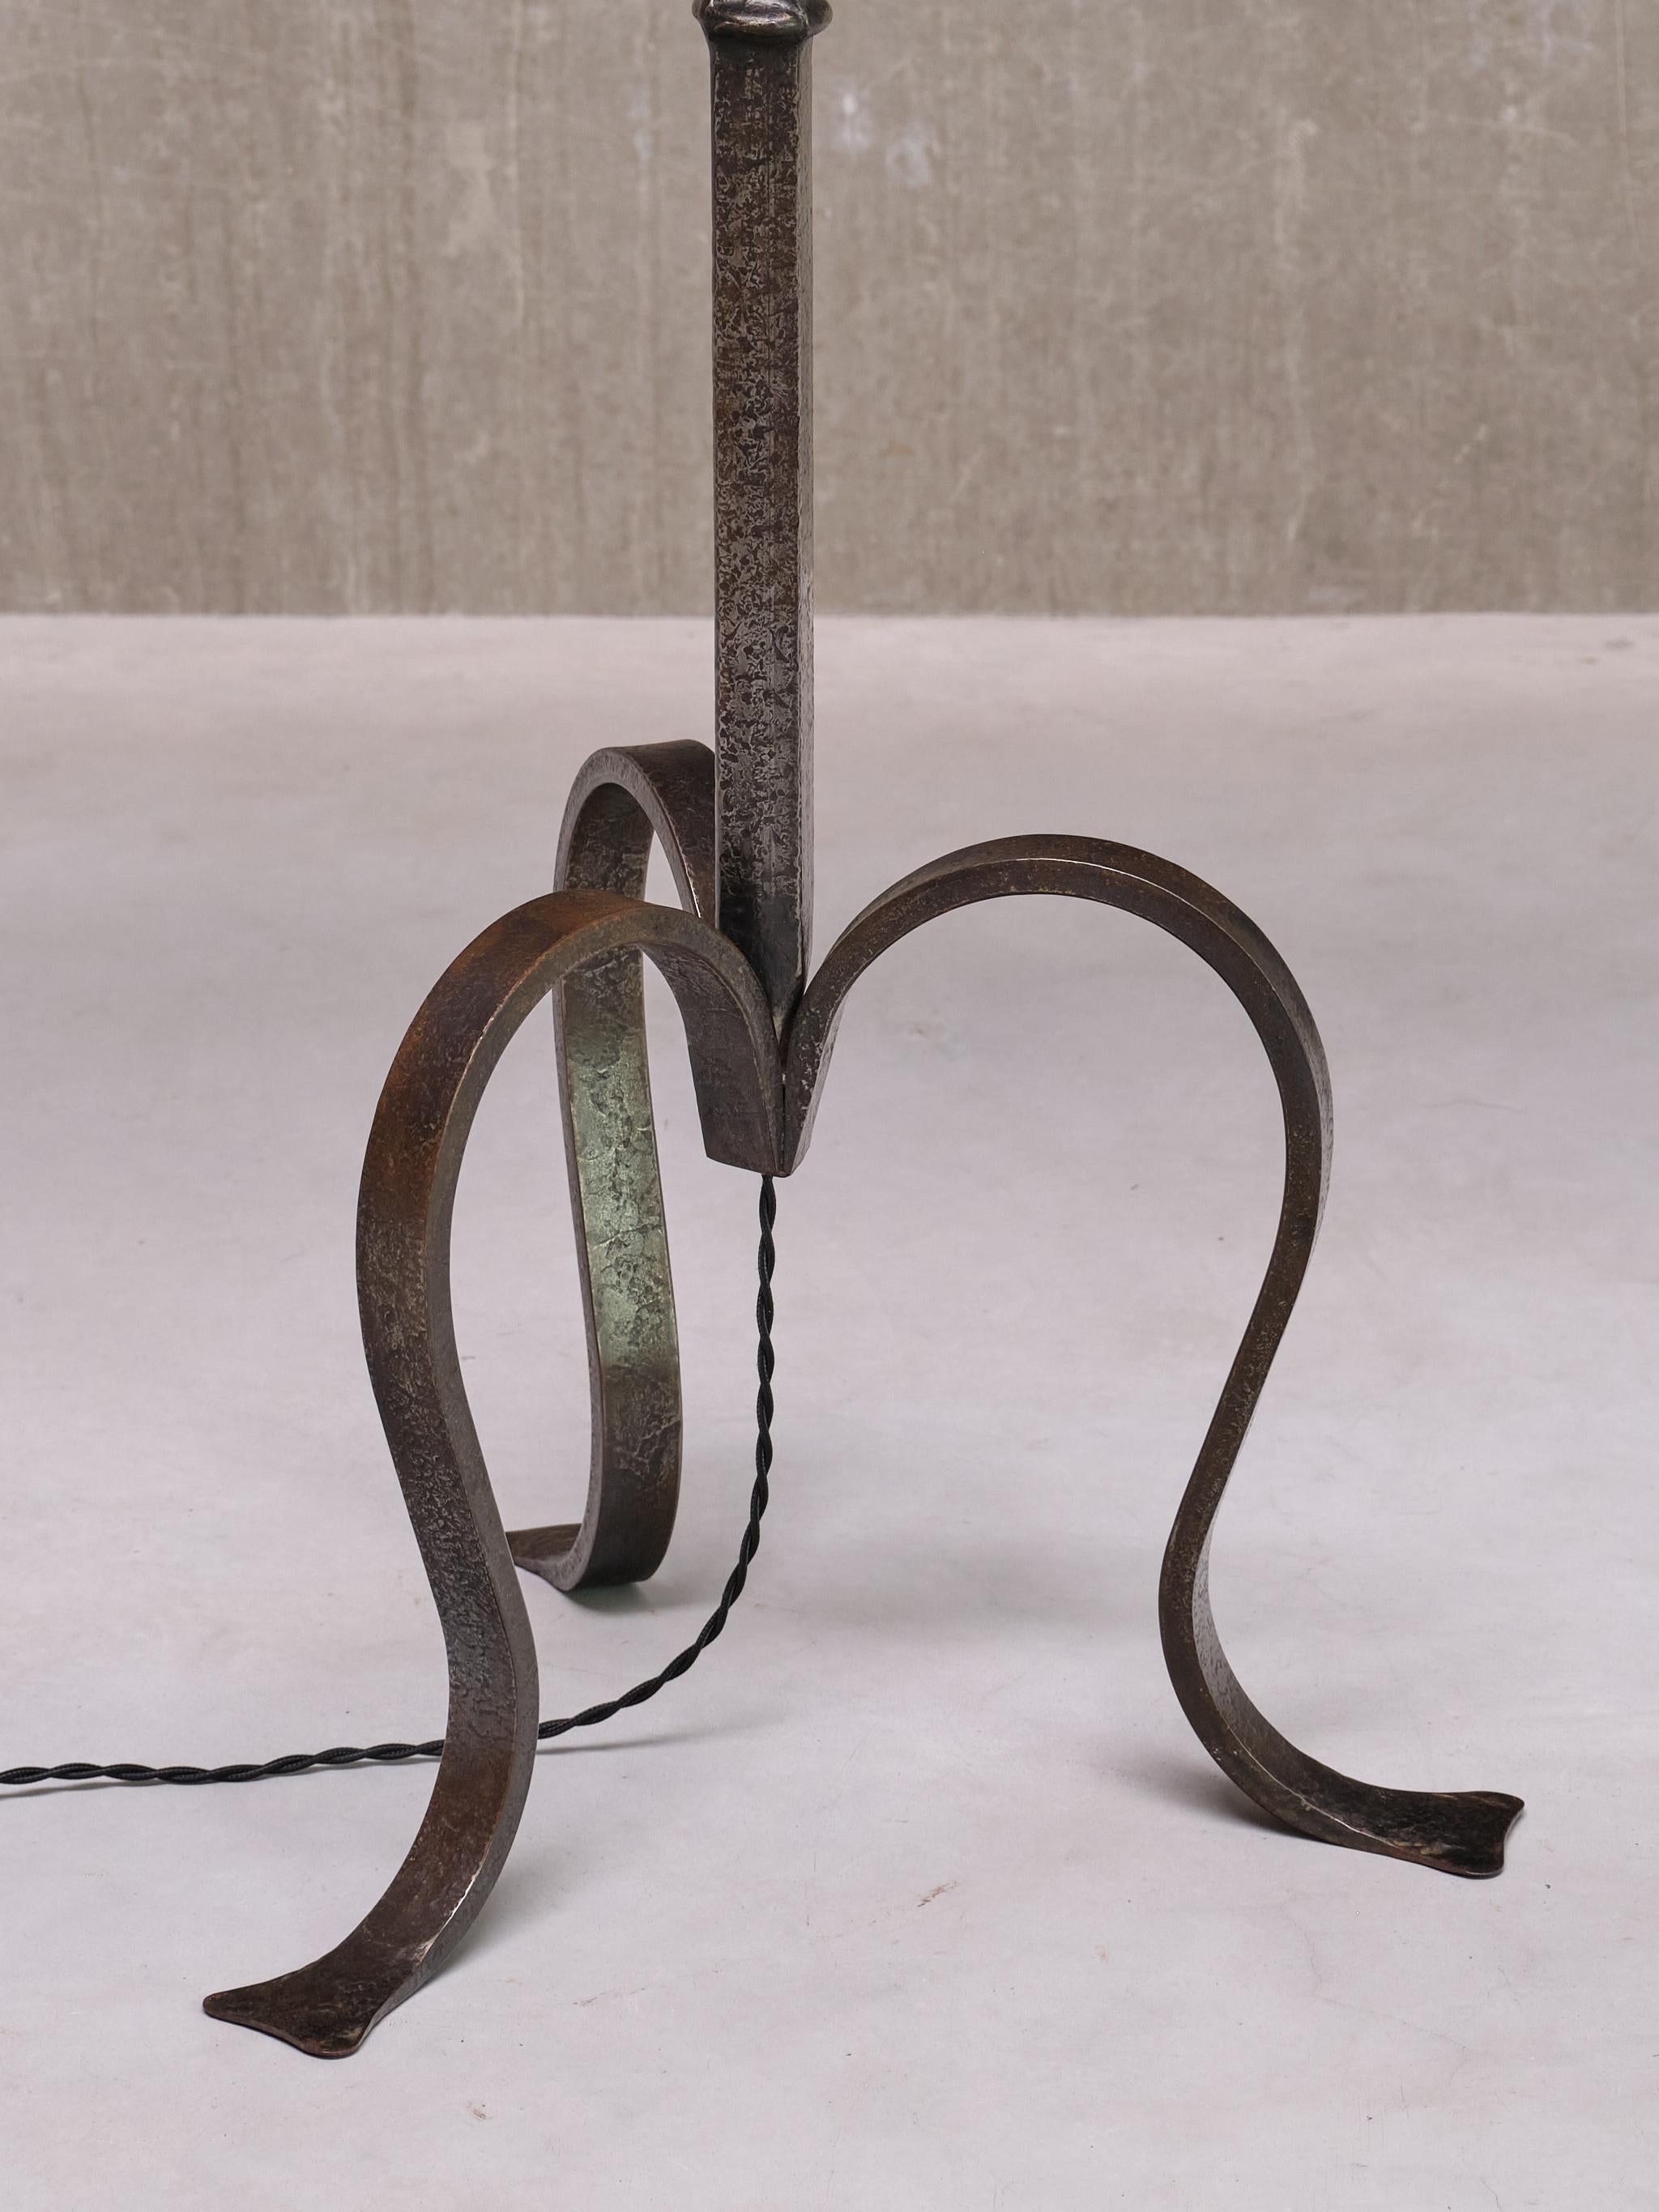 Sculptural French Modern Three Legged Floor Lamp in Wrought Iron, 1950s For Sale 5